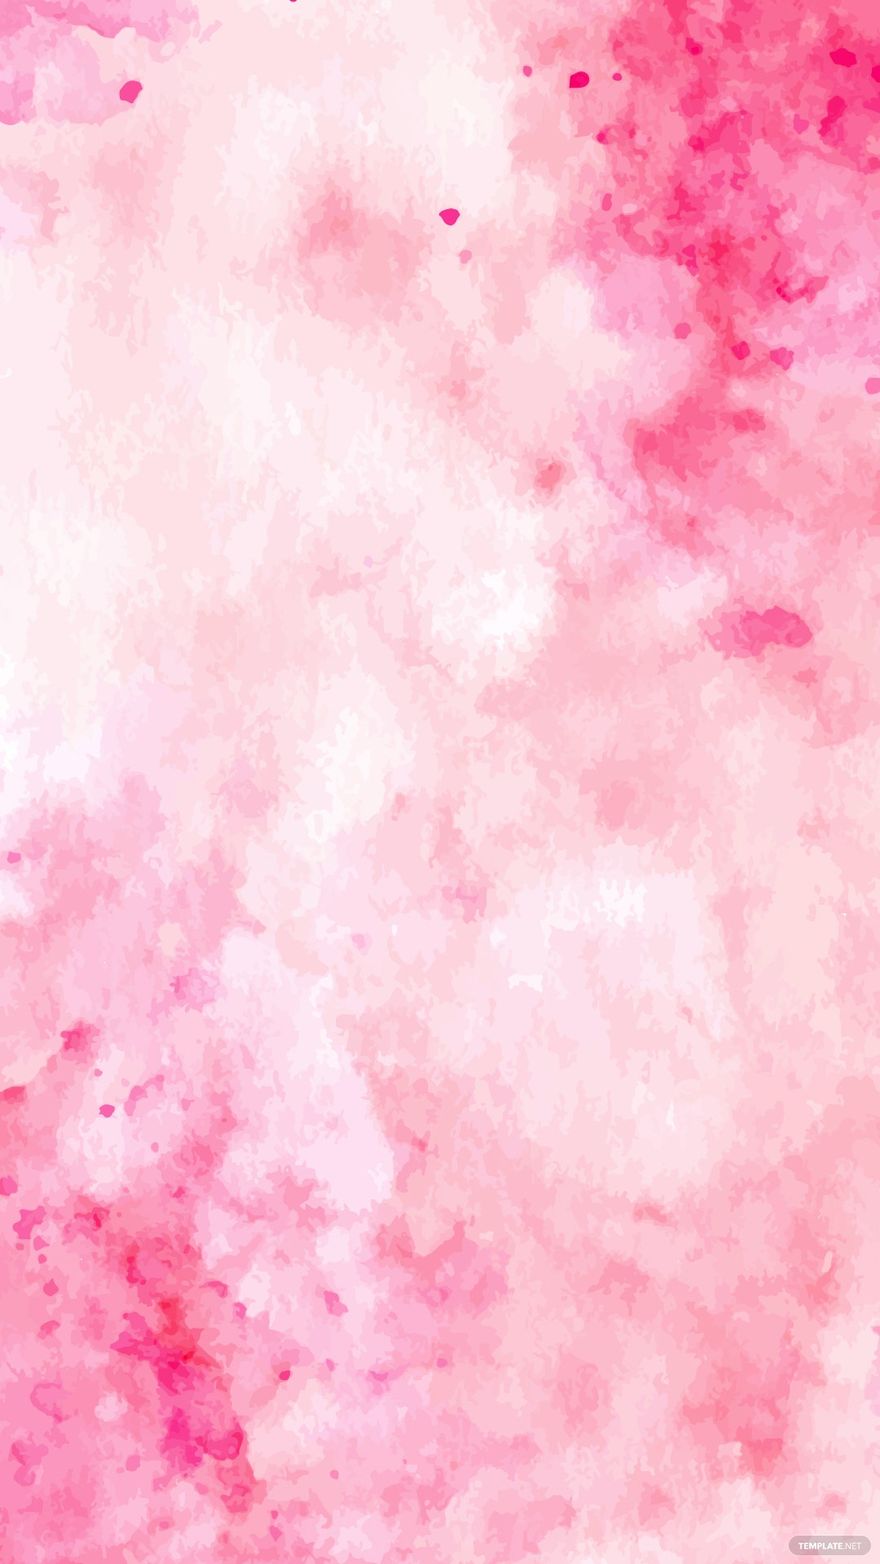 Pink and White iPhone Background in Illustrator, EPS, SVG, JPG